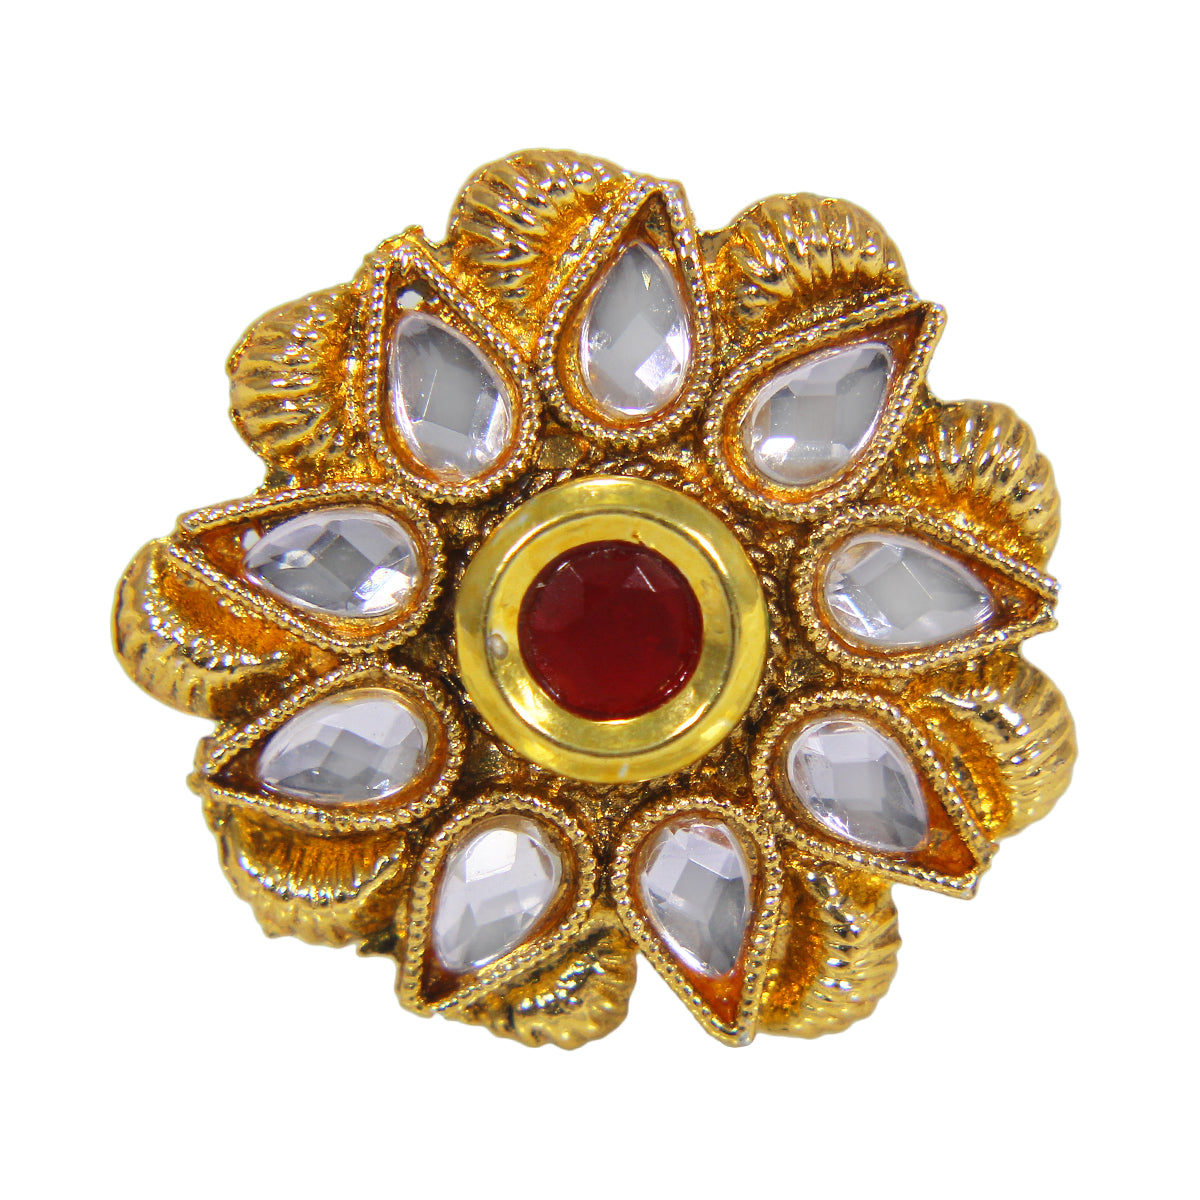 Beautiful Golden Plated Ring with Red White Crystal Stones